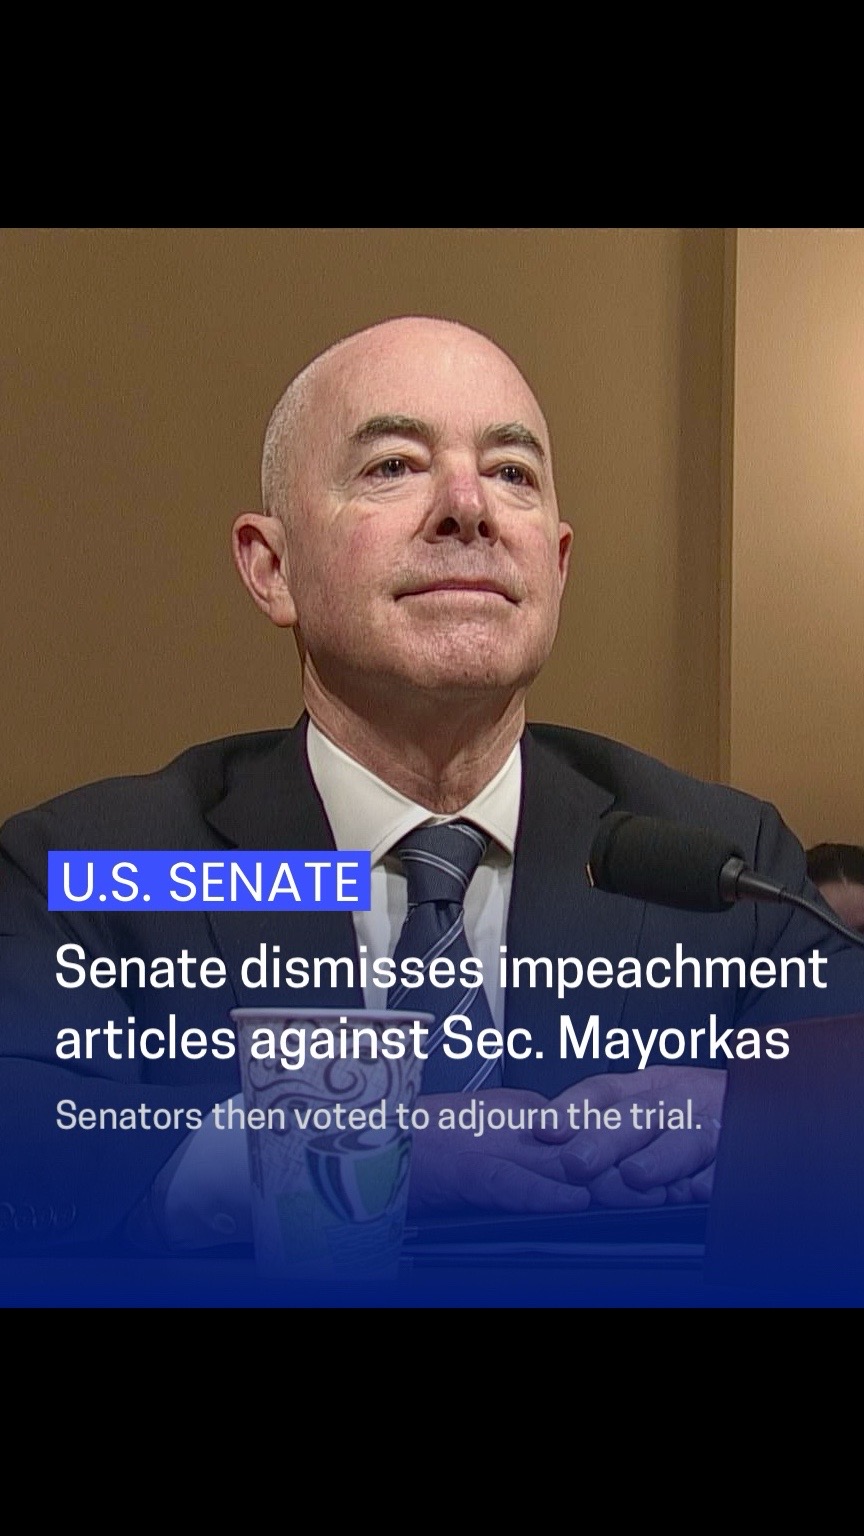 The Senate on Wednesday dismissed the two charges against Homeland Security Secretary Alejandro Mayorkas and ended the brief impeachment trial without rendering a verdict.   The first article — "willful and systemic refusal to comply with the law" — was defeated in a 51–48 nearly party-line vote with Republican Sen. Lisa Murkowski (AK) voting "present."   The second article — "breach of public trust" — was defeated in a 51–49 party-line vote.   Senators then voted along party lines to adjourn the impeachment trial, just the second ever in history for a member of the president's cabinet.   The House very narrowly impeached Secretary Mayorkas on Feb. 13, accusing him of failing to implement im